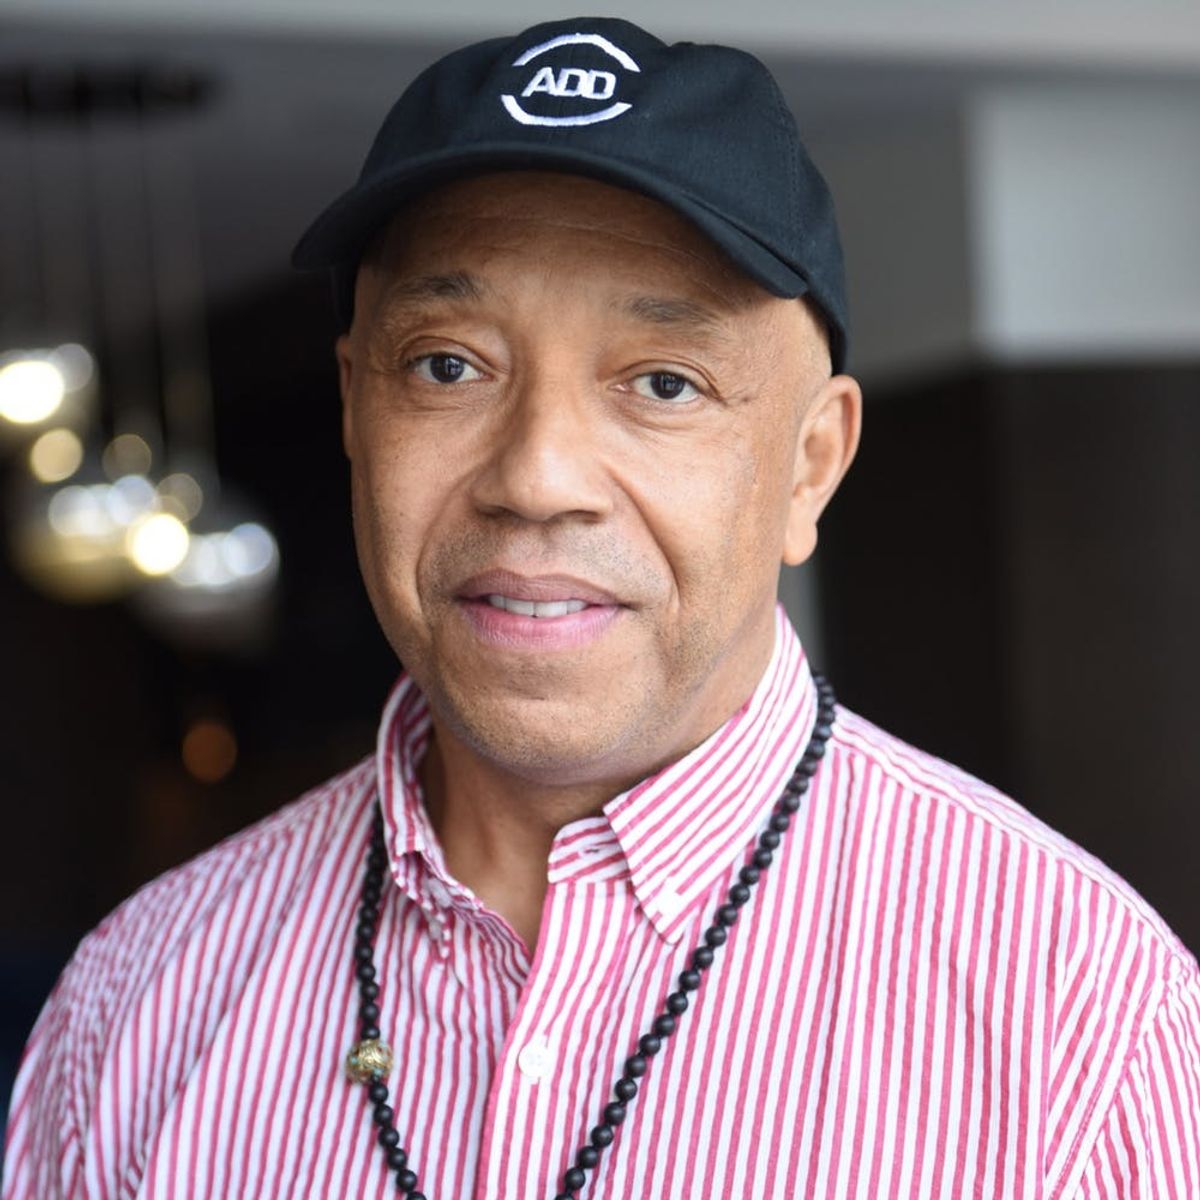 Russell Simmons Steps Down Amid New Assault Allegations Against Him